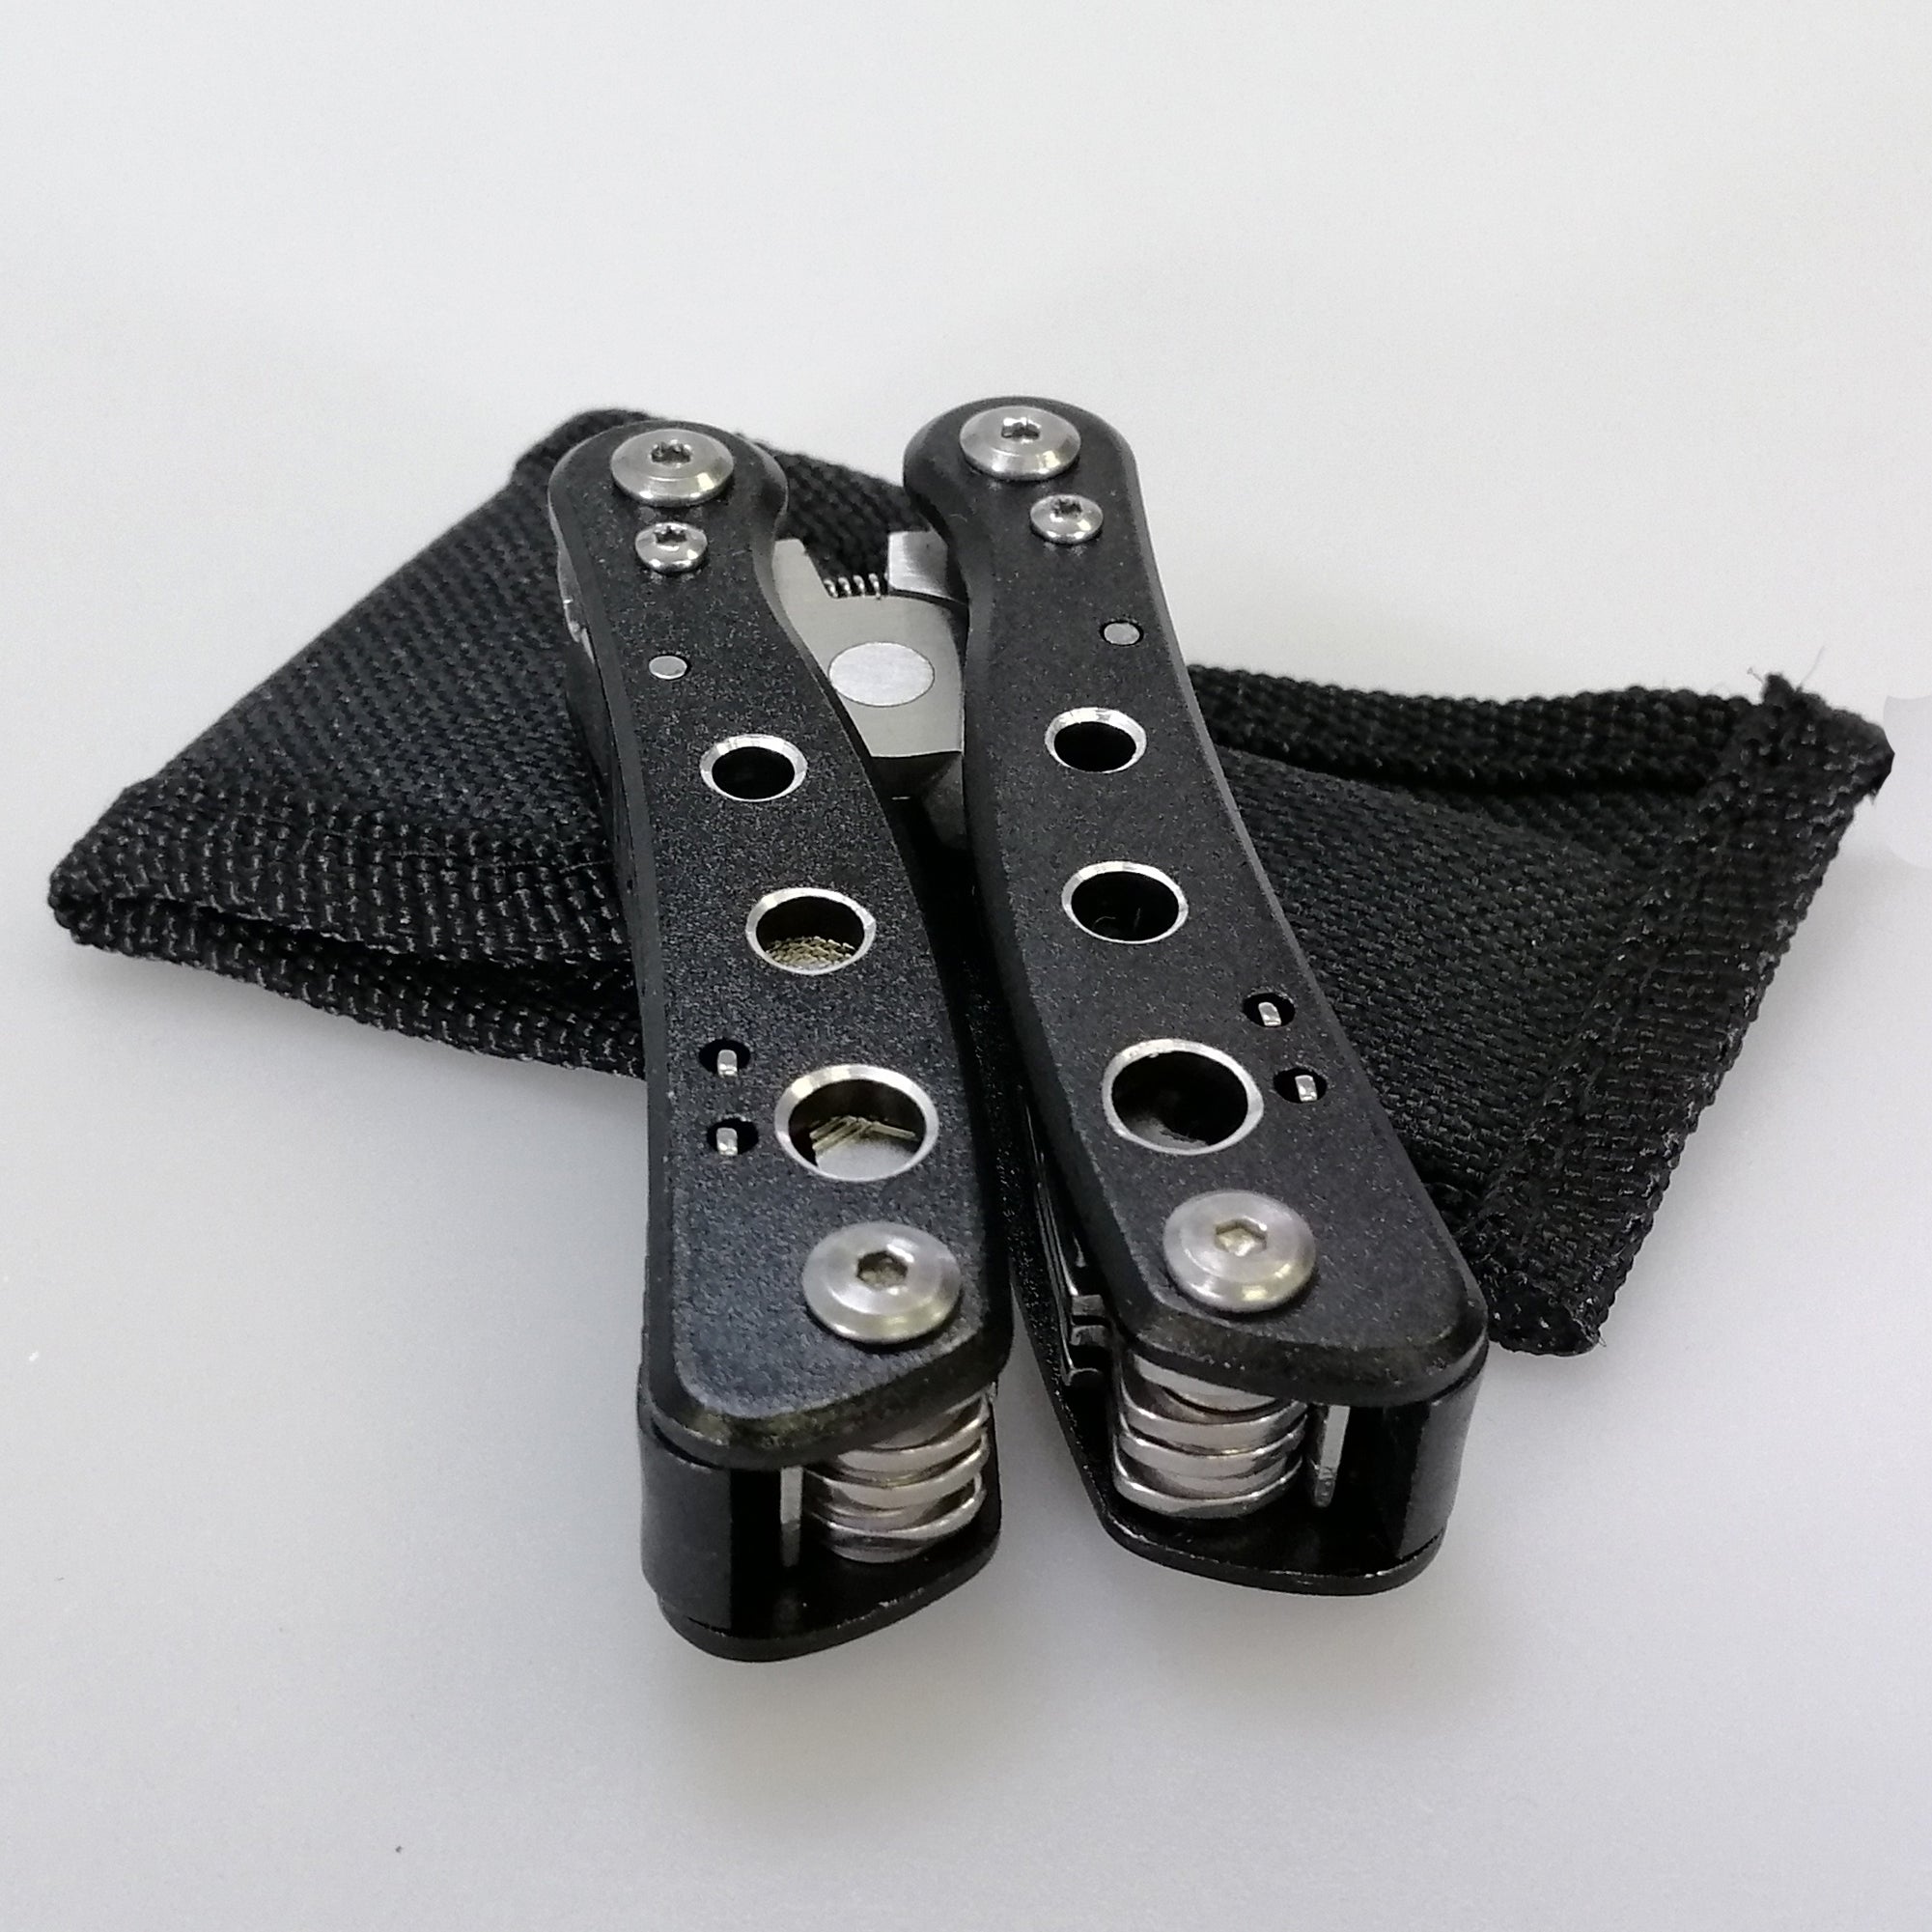 Gents Society - 10 Feature Multi-tool